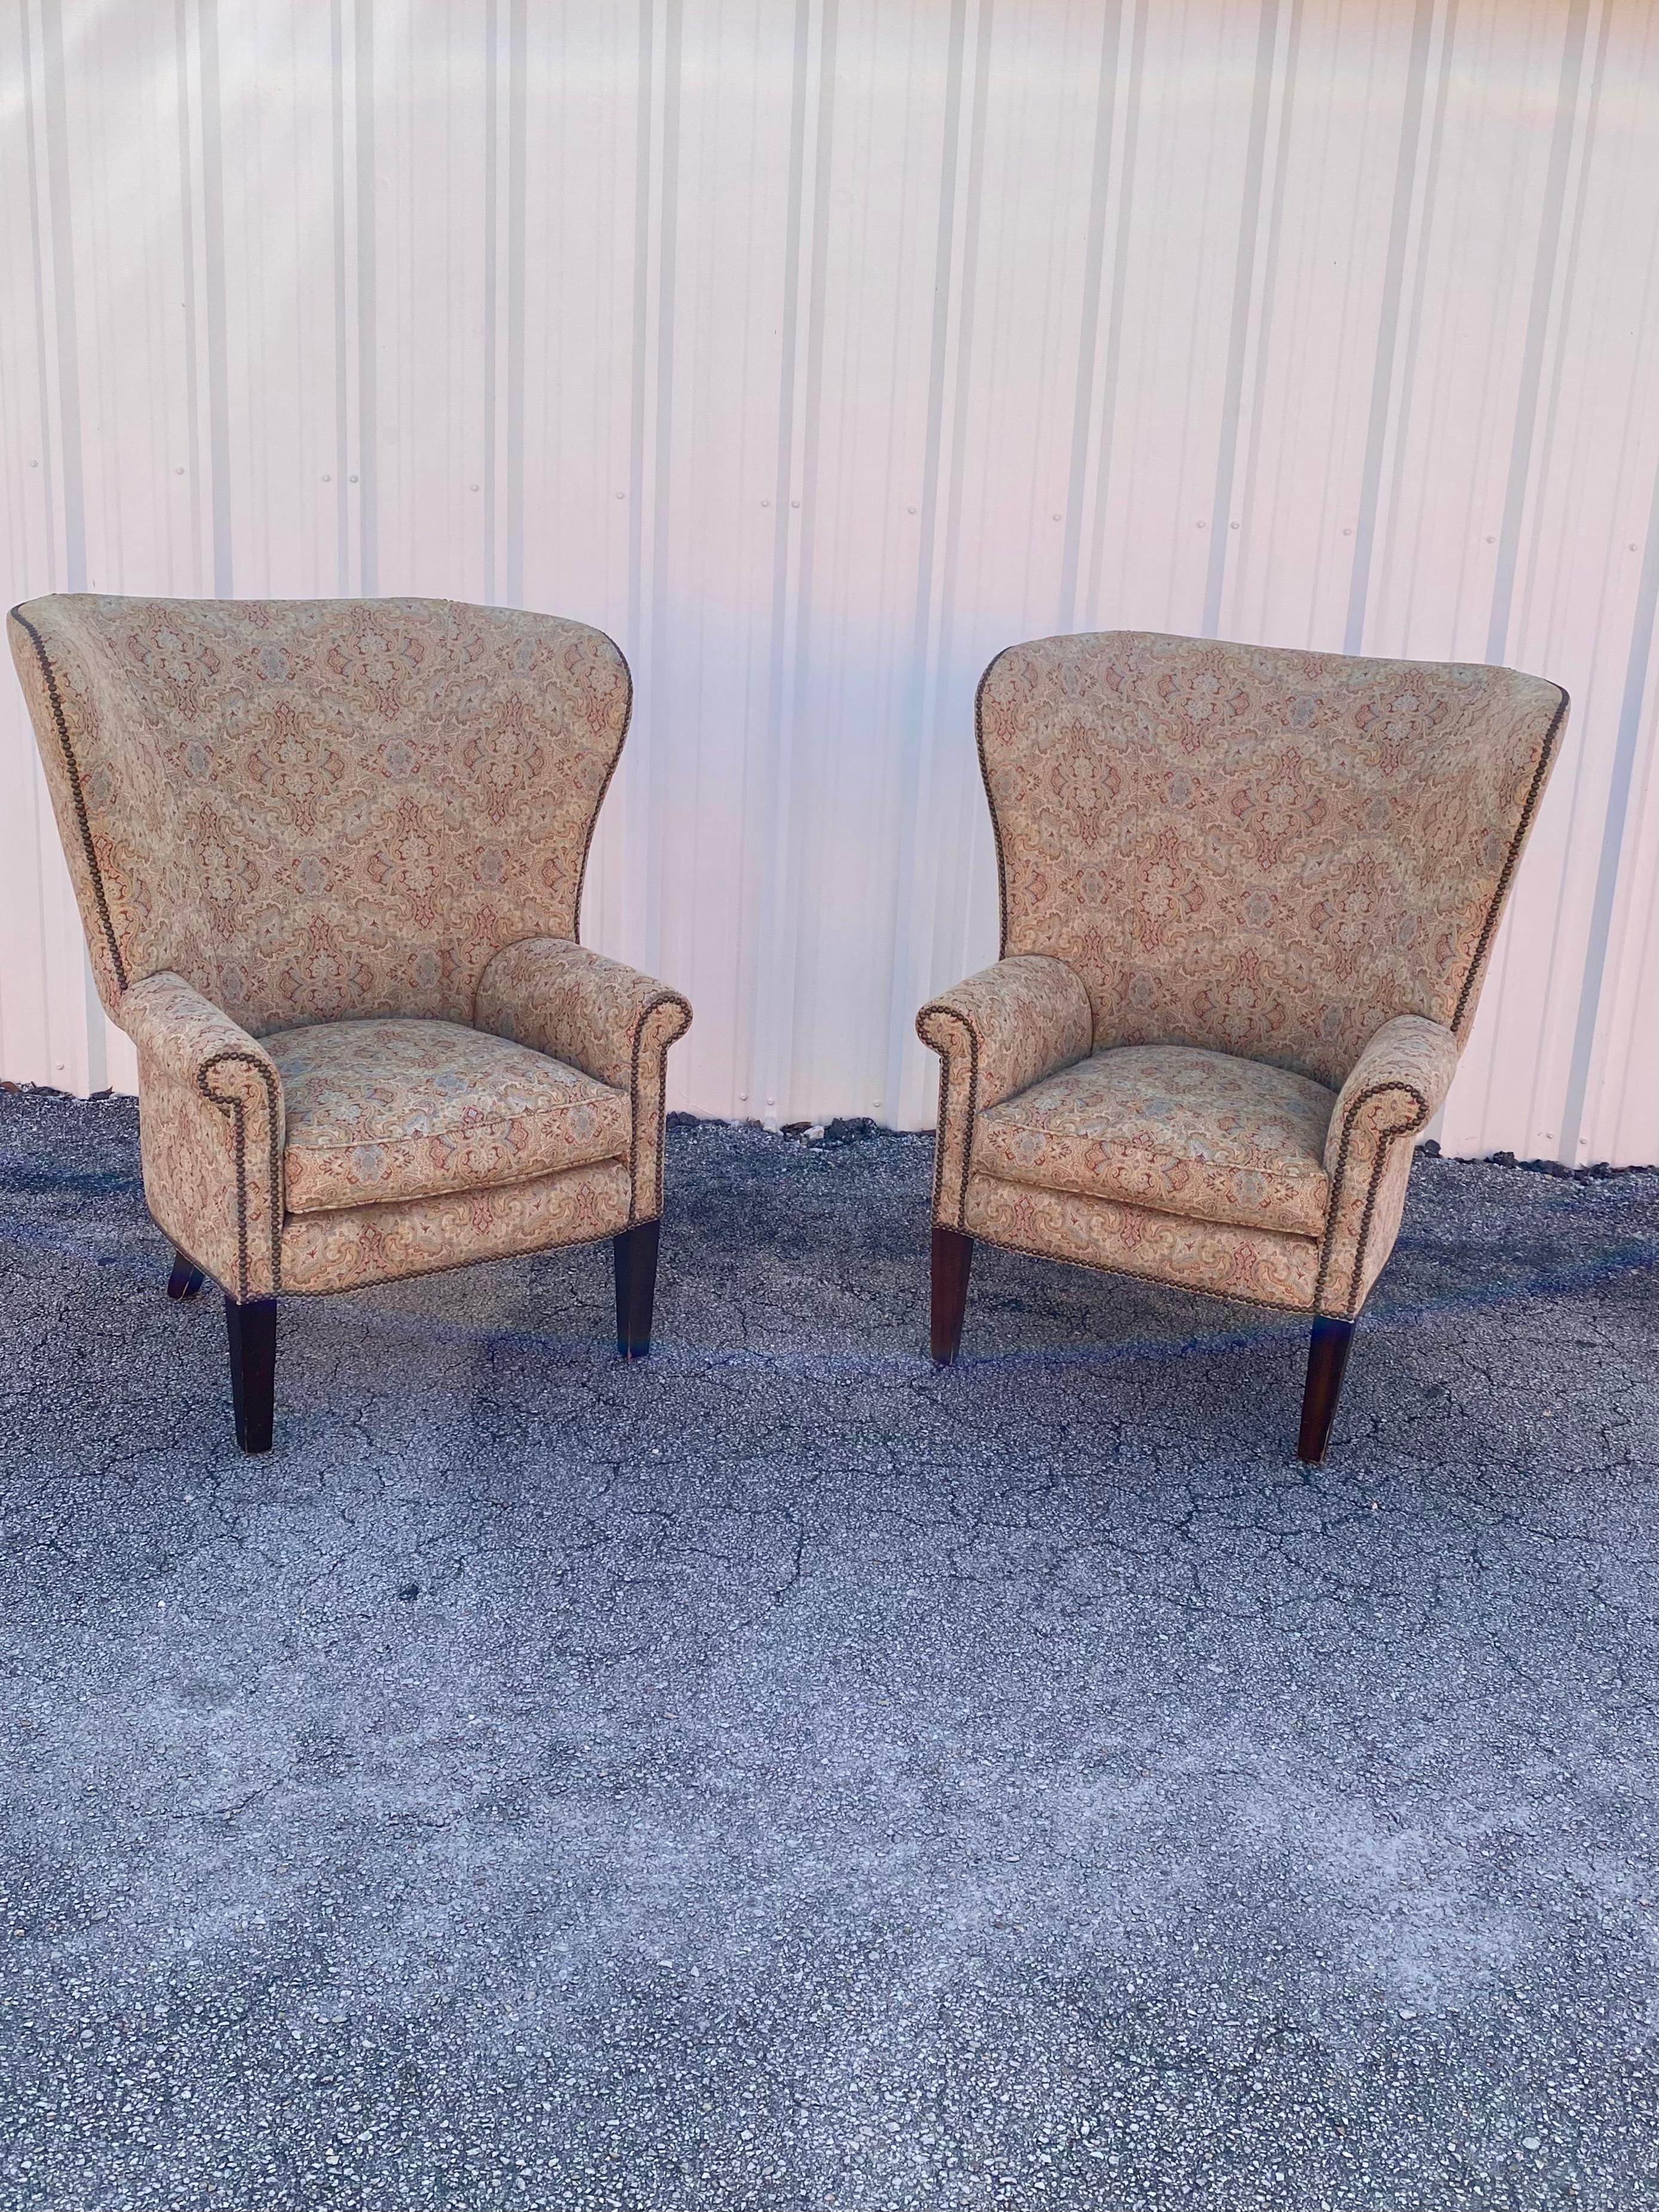 1990s XL Ralph Lauren Henredon Sculptural Curved Wing Chairs, Set of 2 In Excellent Condition For Sale In Fort Lauderdale, FL